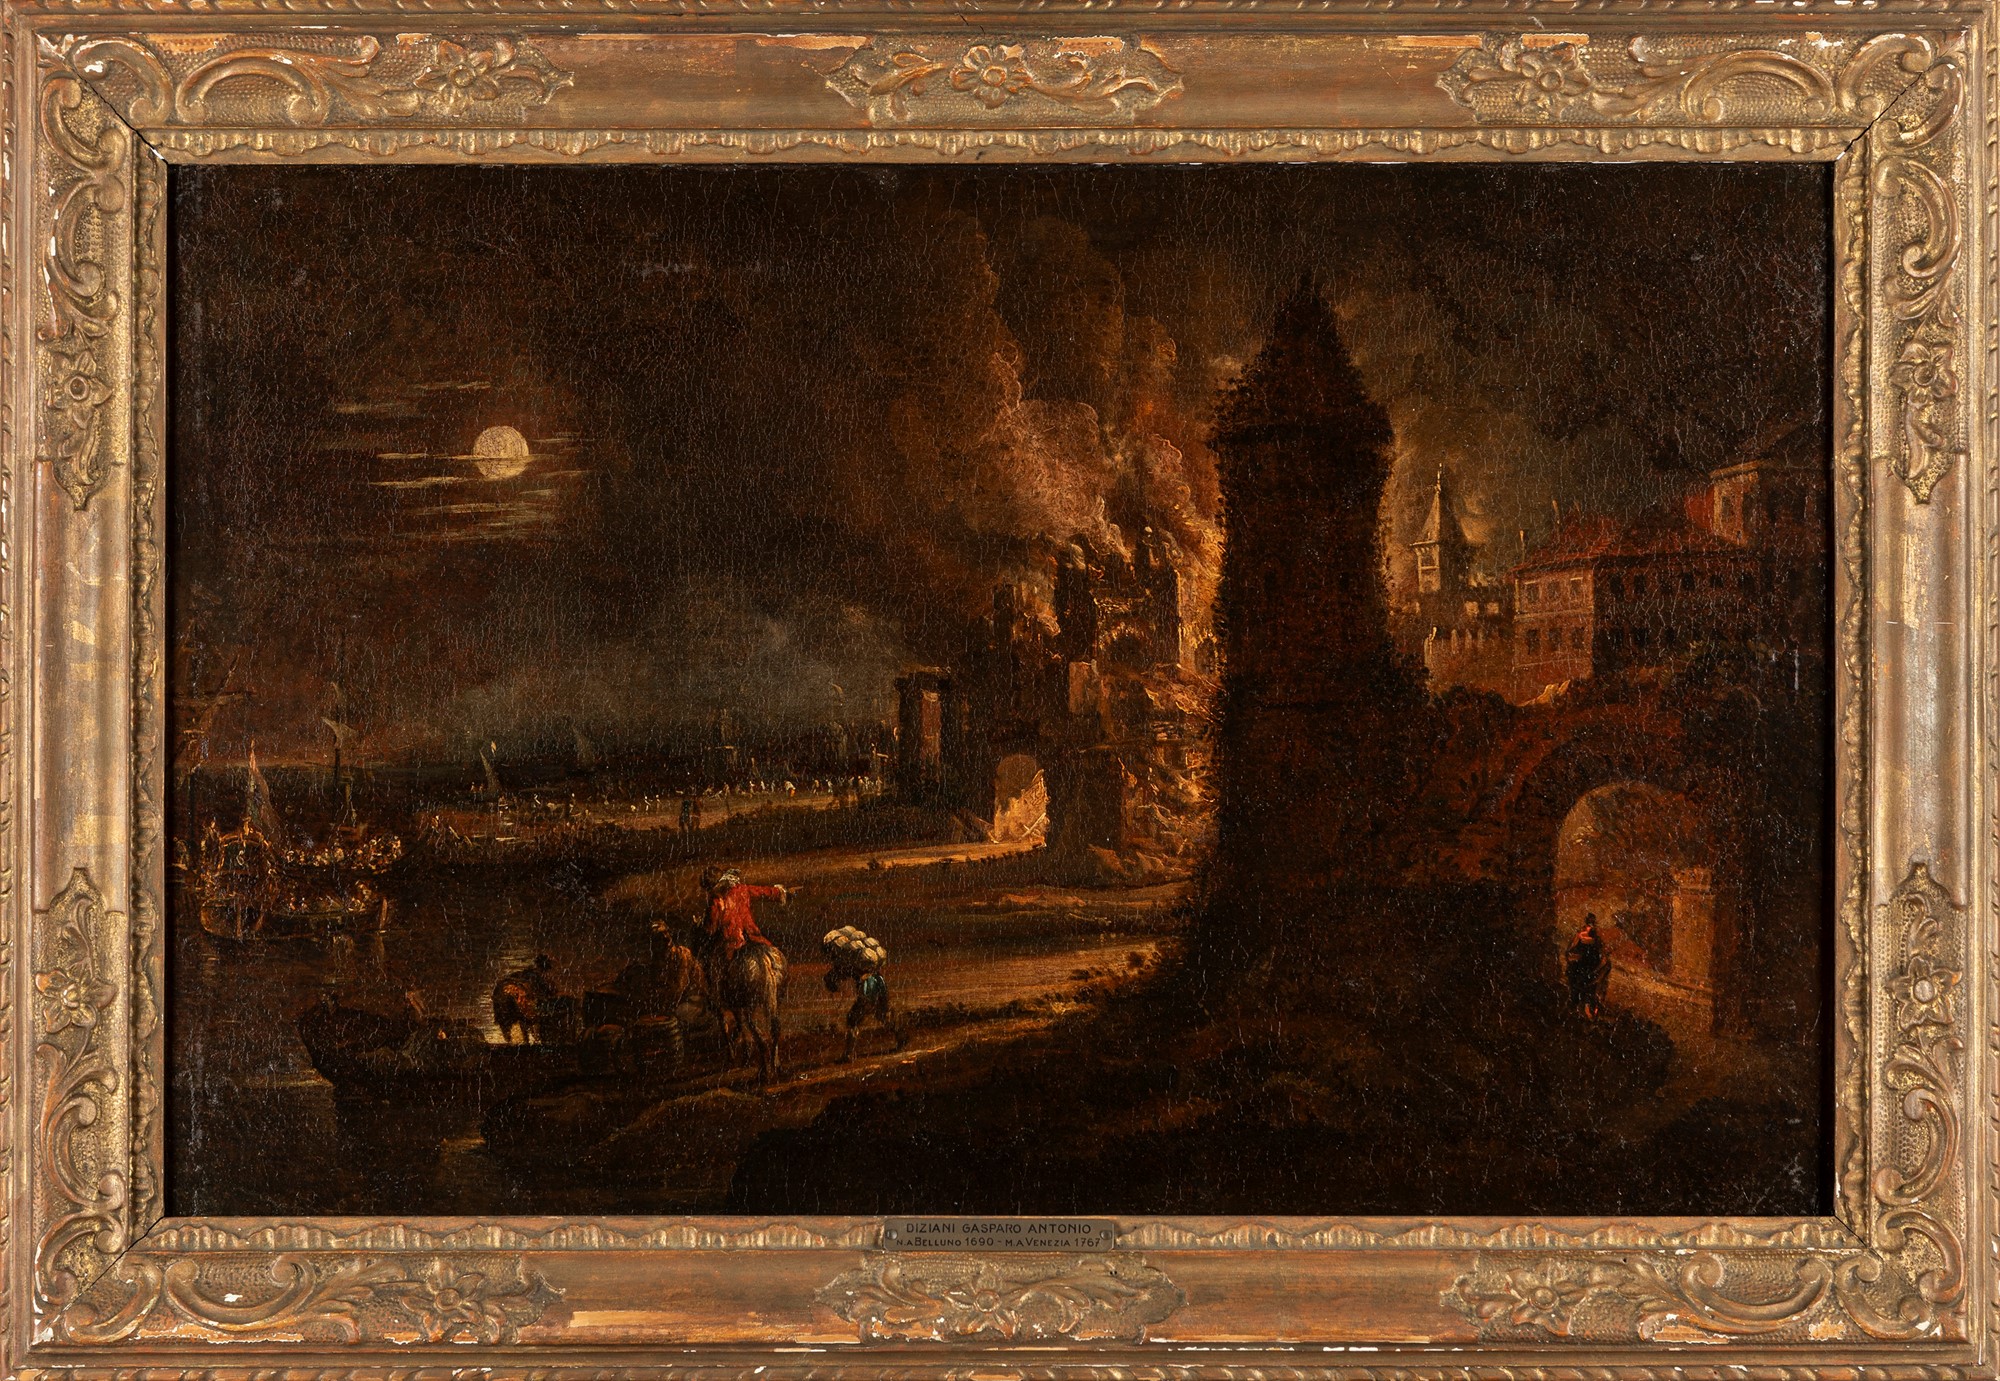 Flemish artist active in Italy, late seventeenth century - early eighteenth century - Night scene wi - Image 2 of 3